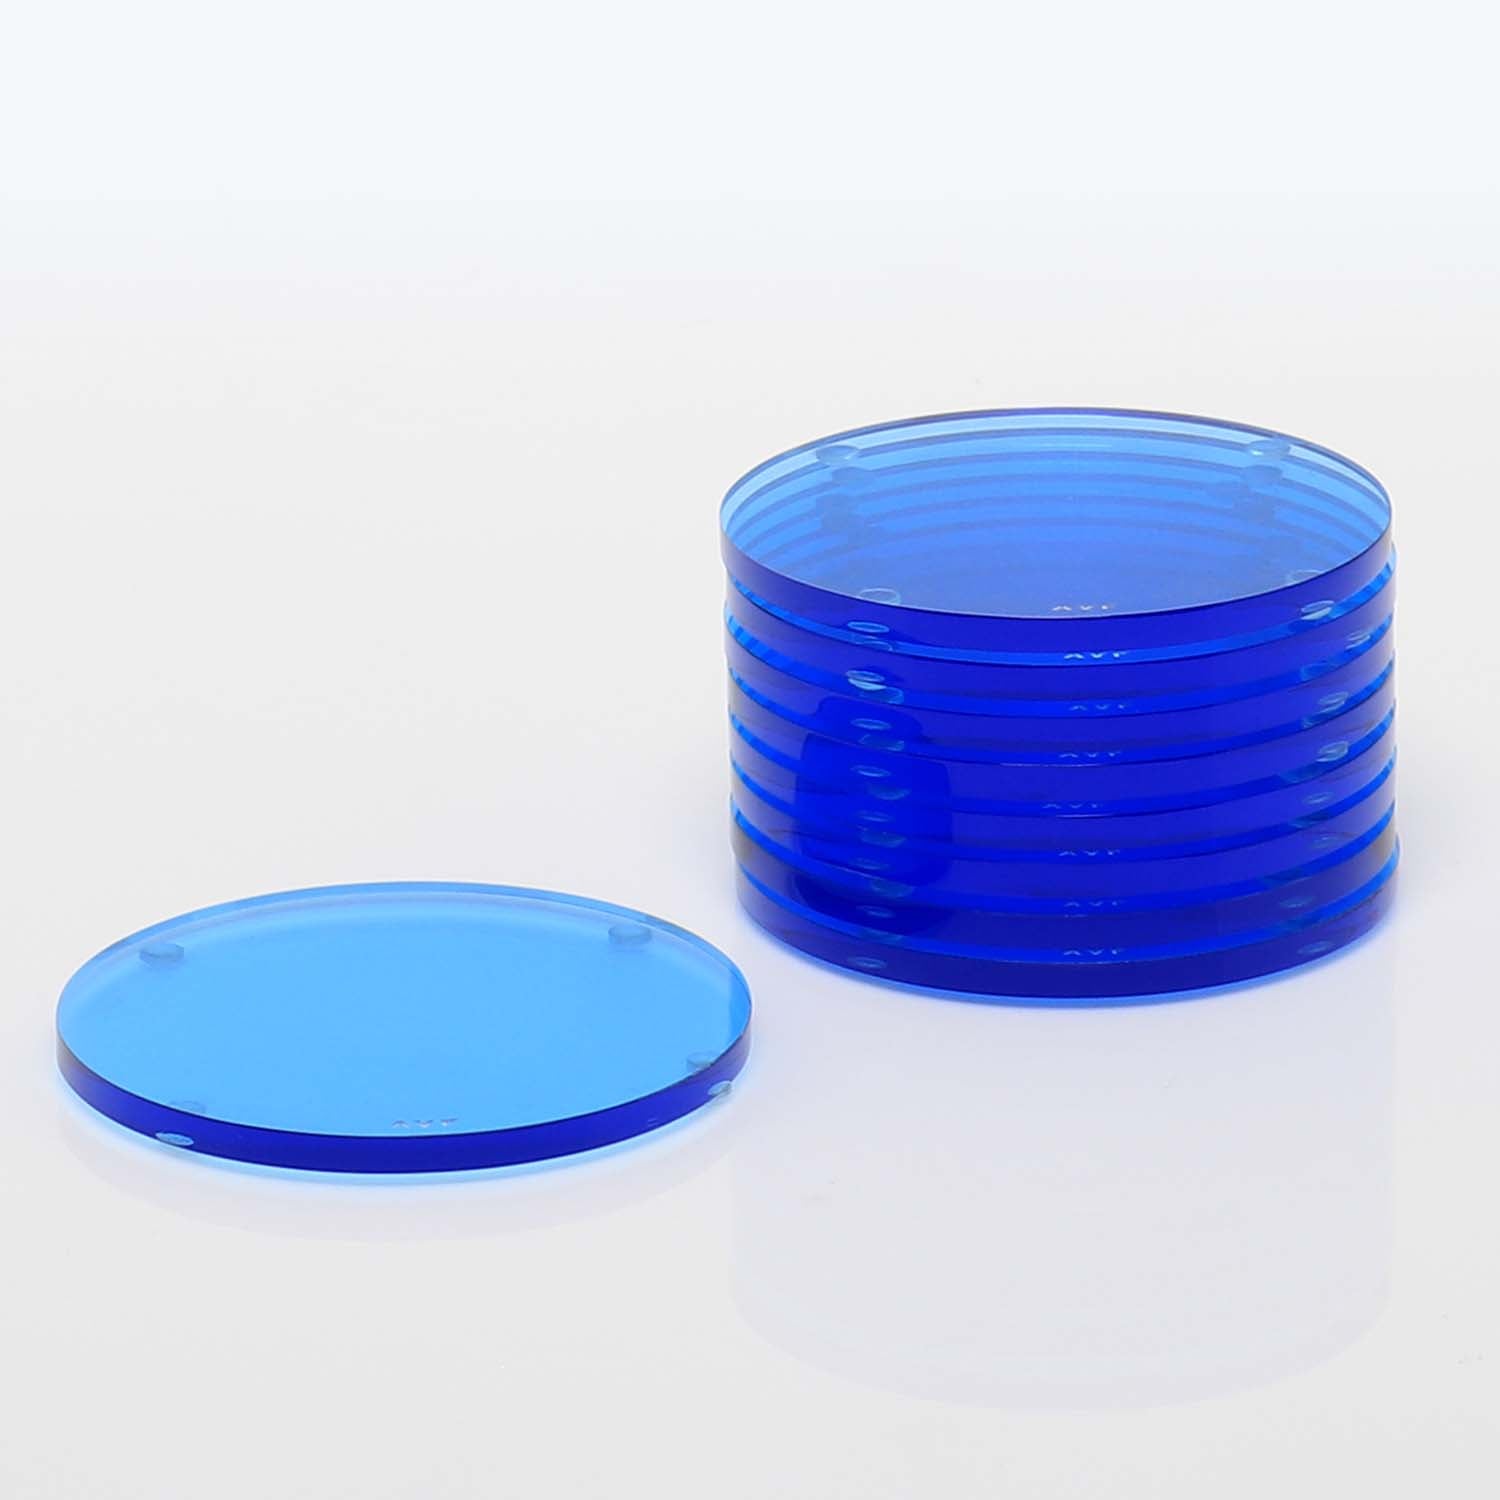 Blue plastic Petri dishes and lid on a clean white surface.